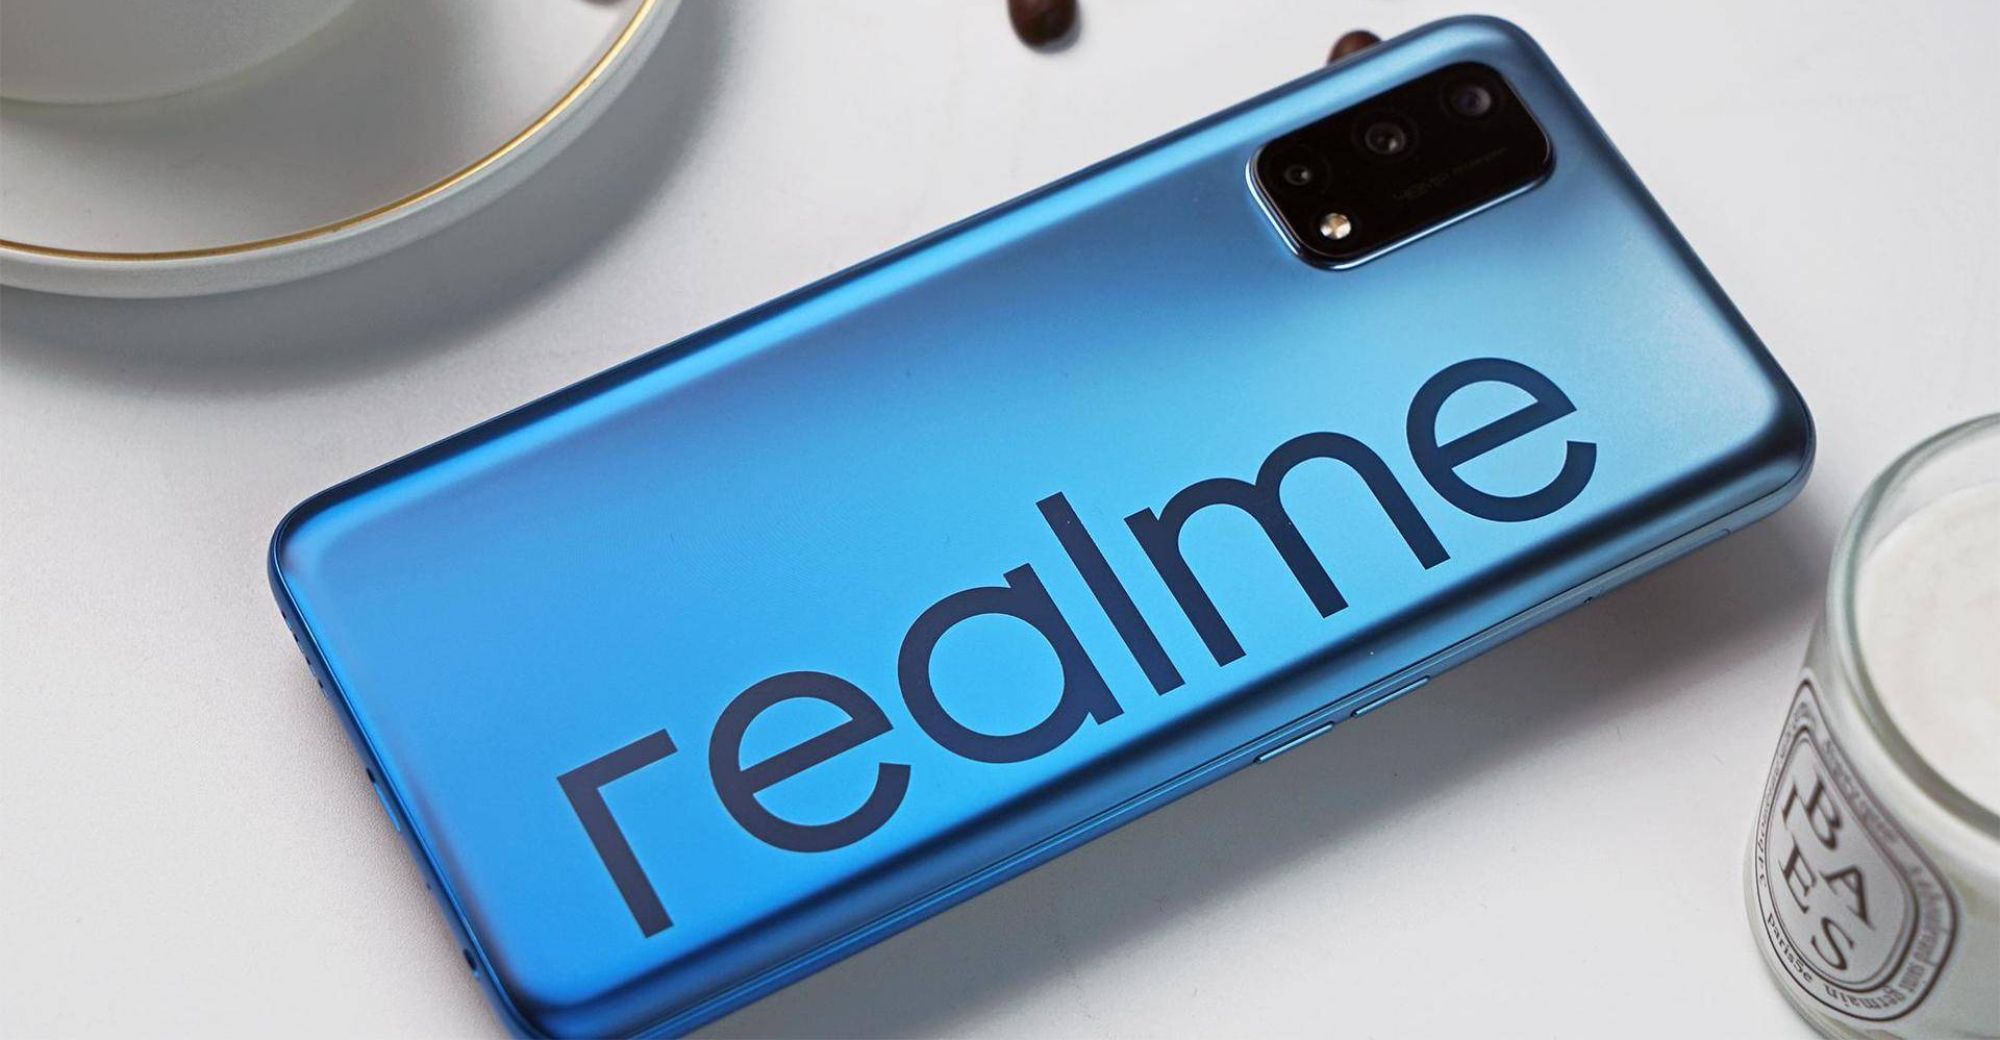 Realme Announces the Release of the Realme GT5 Smartphone on August 28th